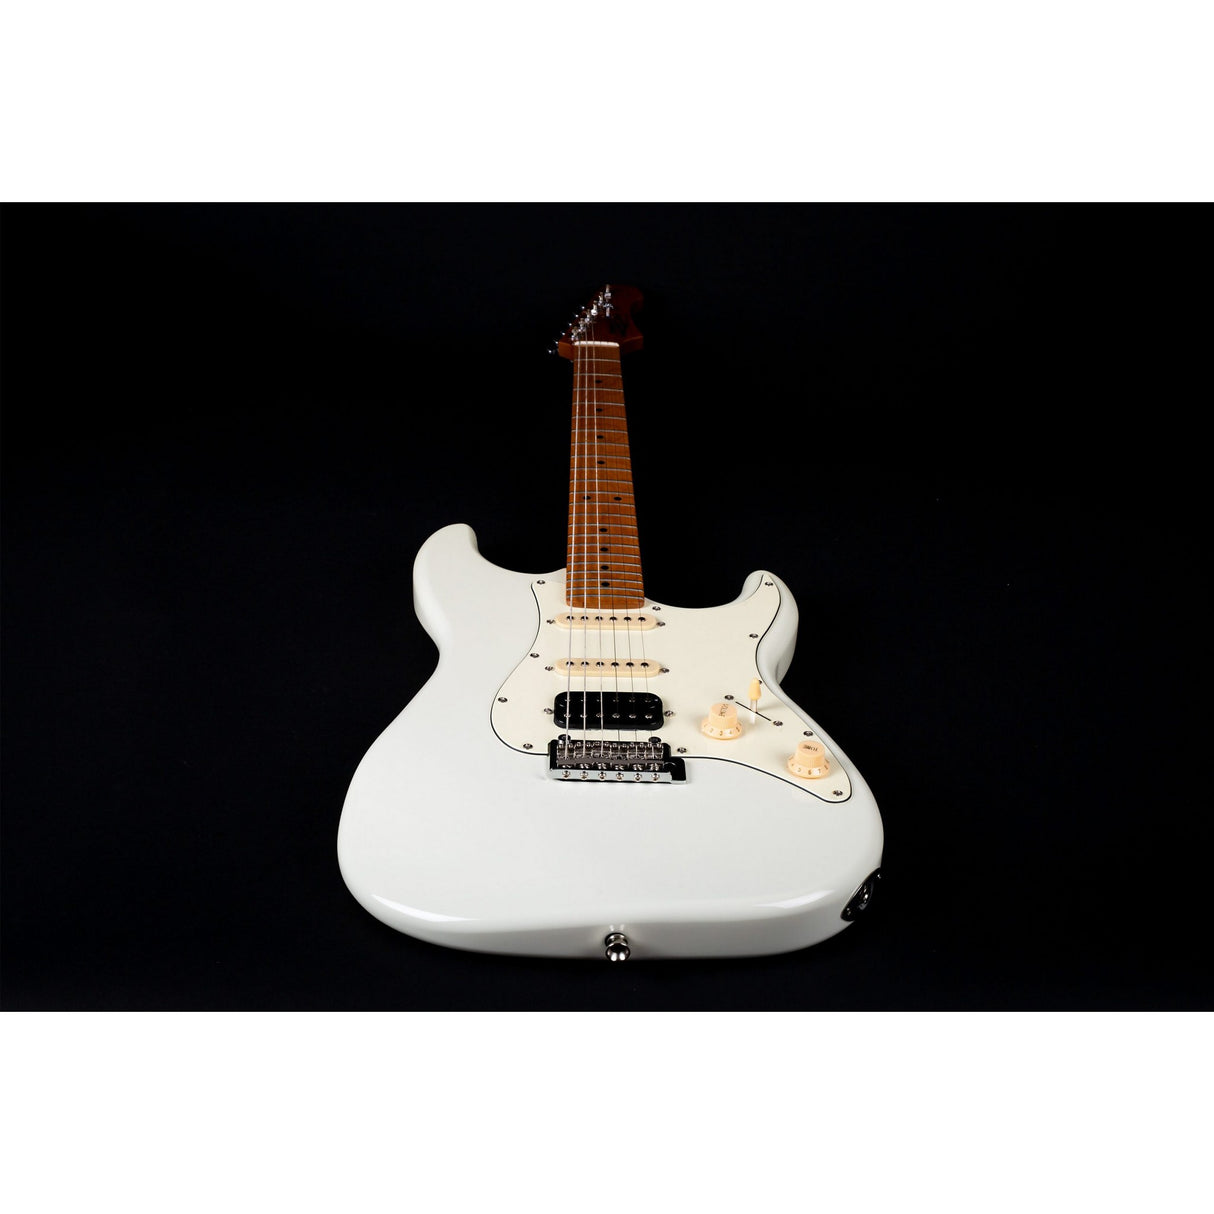 Jet Guitars JS 400 OW HSS Basswood Body Electric Guitar with Roasted Maple Neck and Fretboard